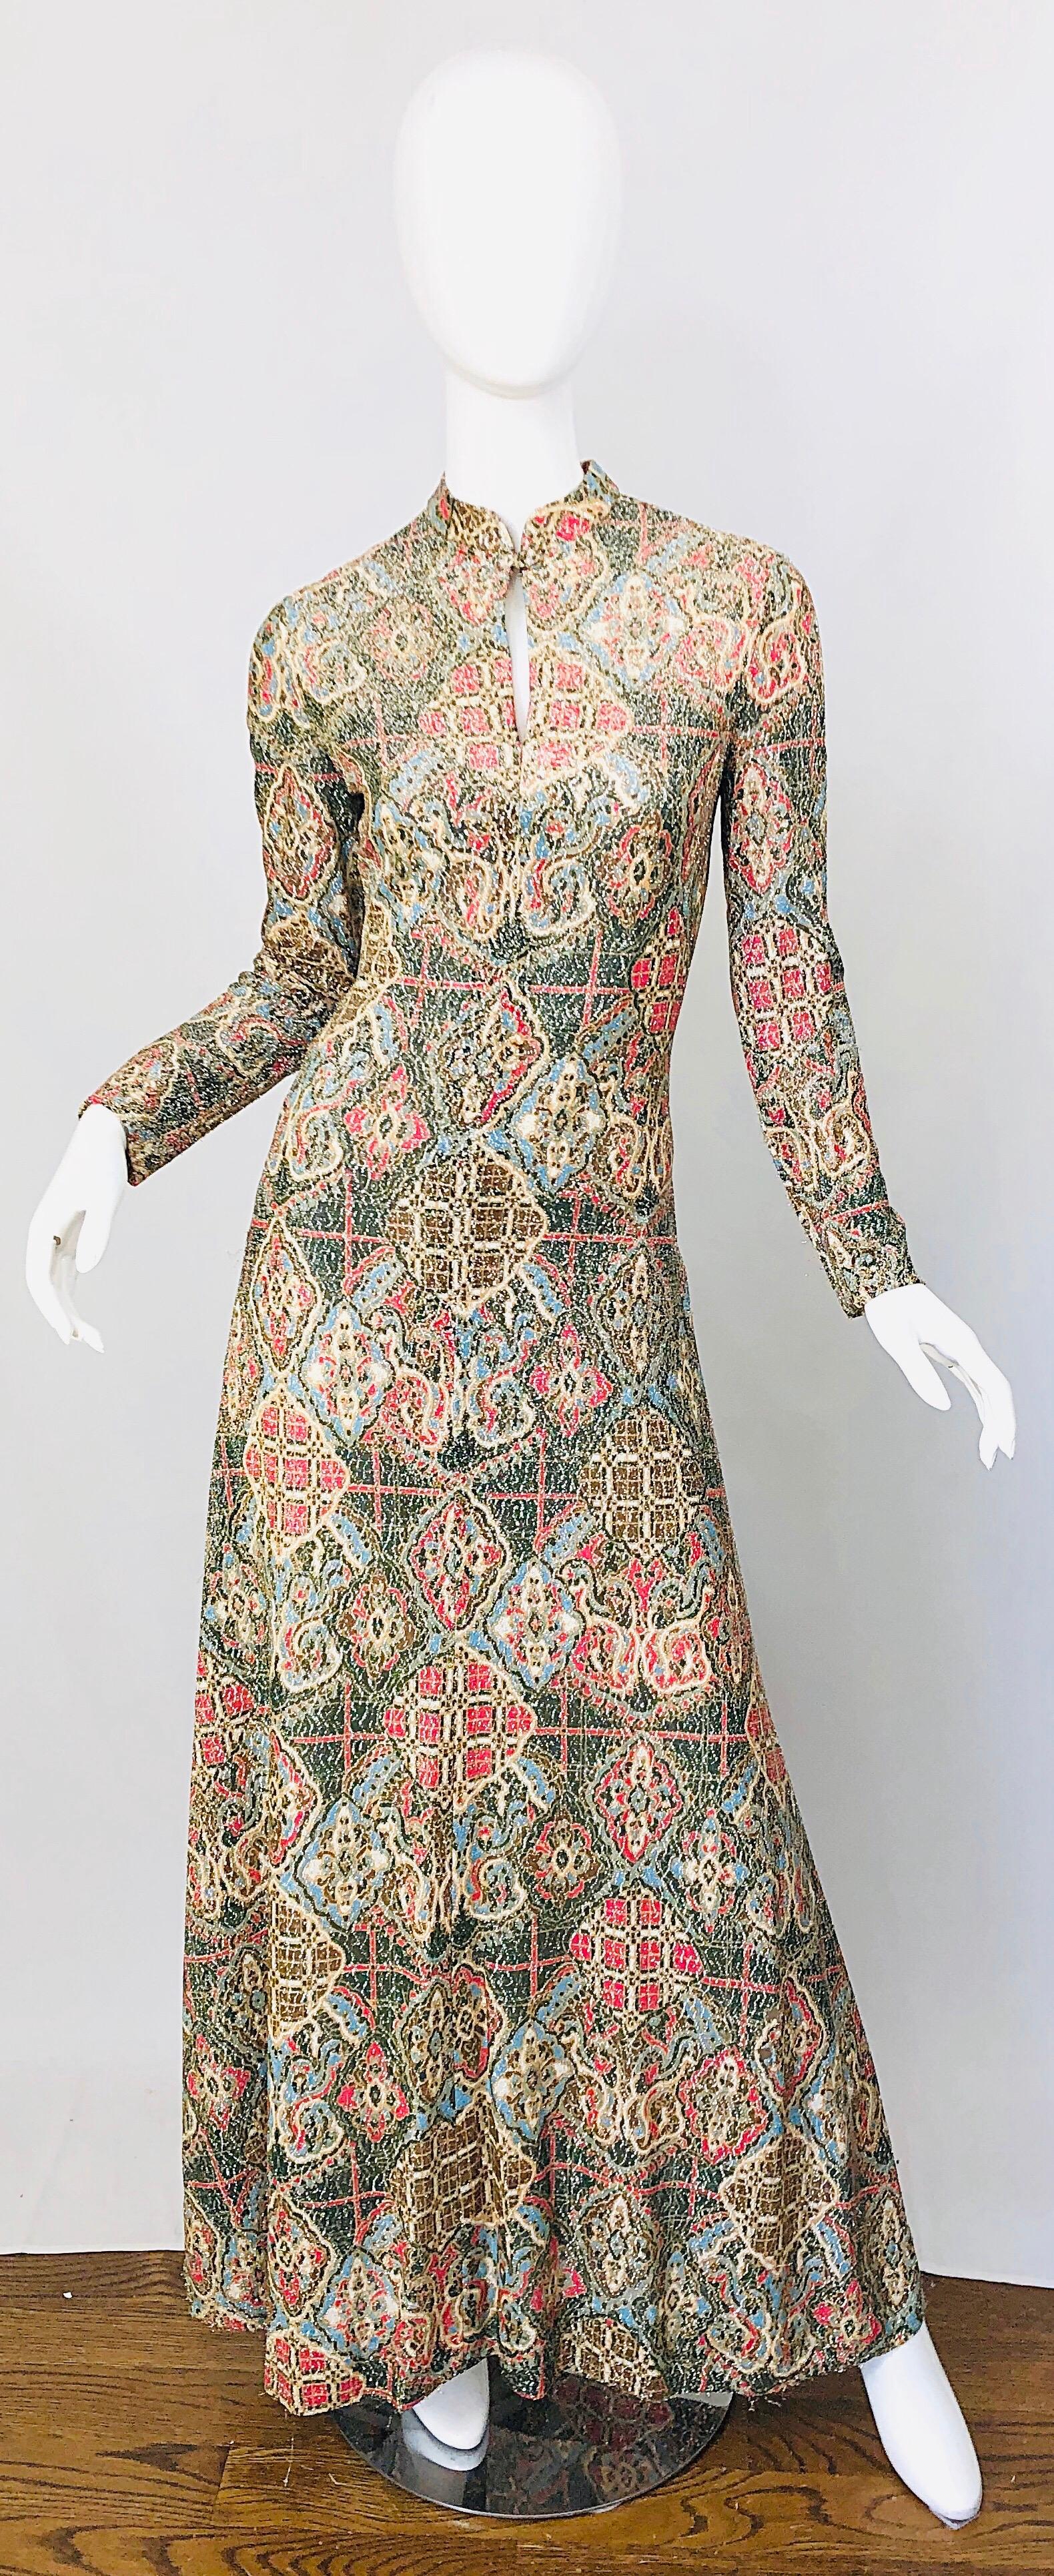 Amazing 1970s ADELE SIMPSON lurex silk metallic baroque ethnic print Cheongsam style gown / maxi dress ! Features warm colors of red, blue, green, and brown throughout. Fabric covered button at top center neck with a slight peek-a-boo slit. Fully